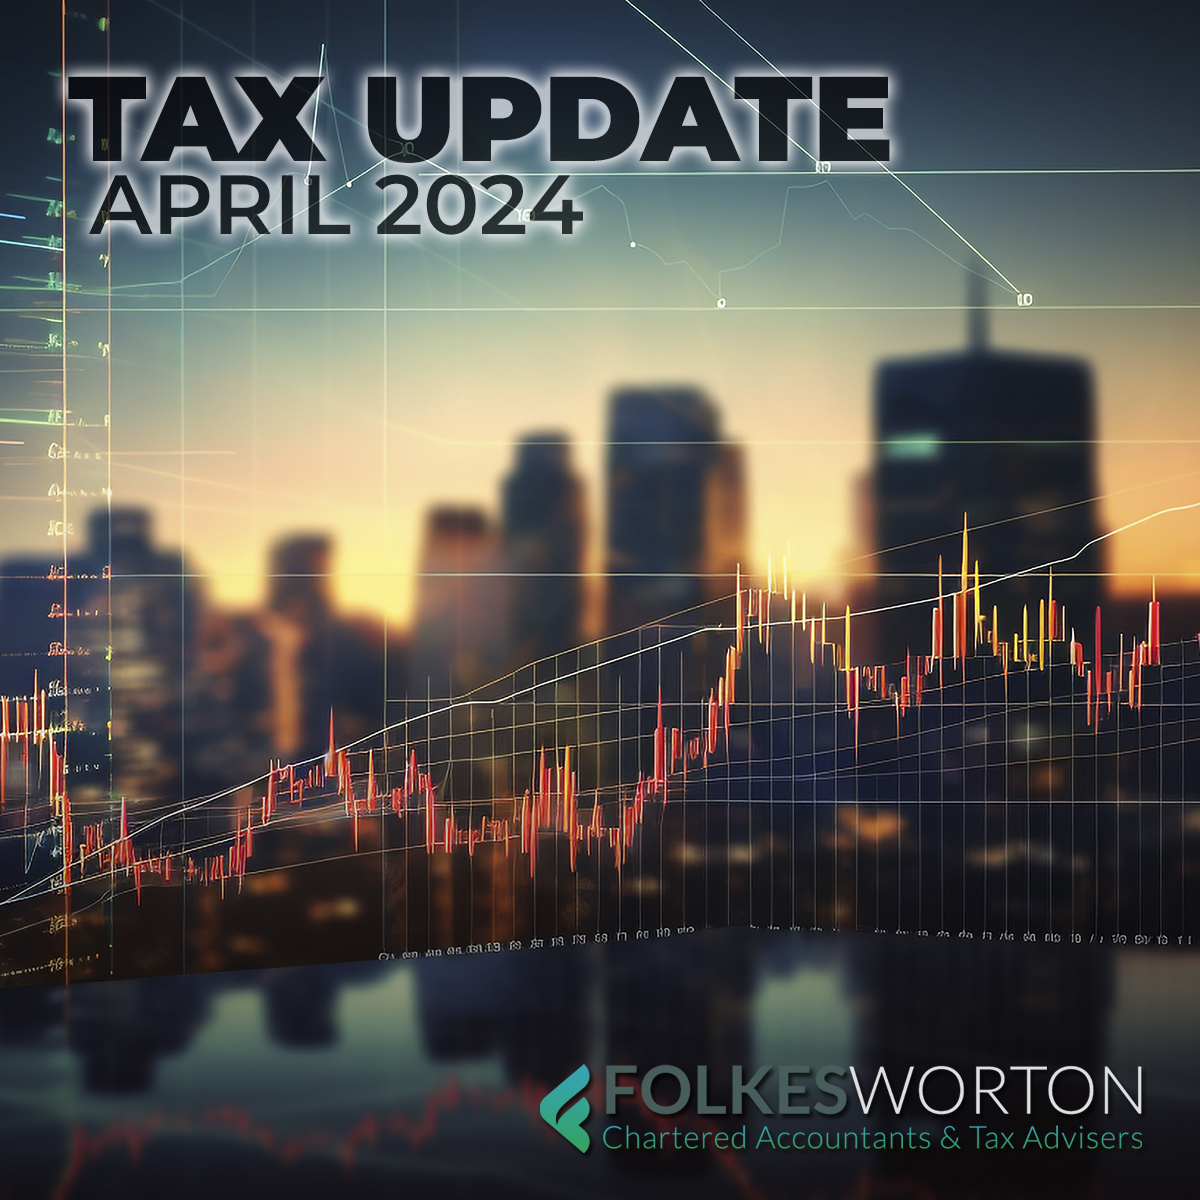 Tax Update April 2024
We take a look at the changes for the new tax year, child benefit claims, #cashaccounting, changes to the Basis of Assessment, #MTD, #capitalallowances & #researchanddevelopment
#Accountants #AccountingForTheFuture #yearendaccounts
fwca.co.uk/tax-update-apr…